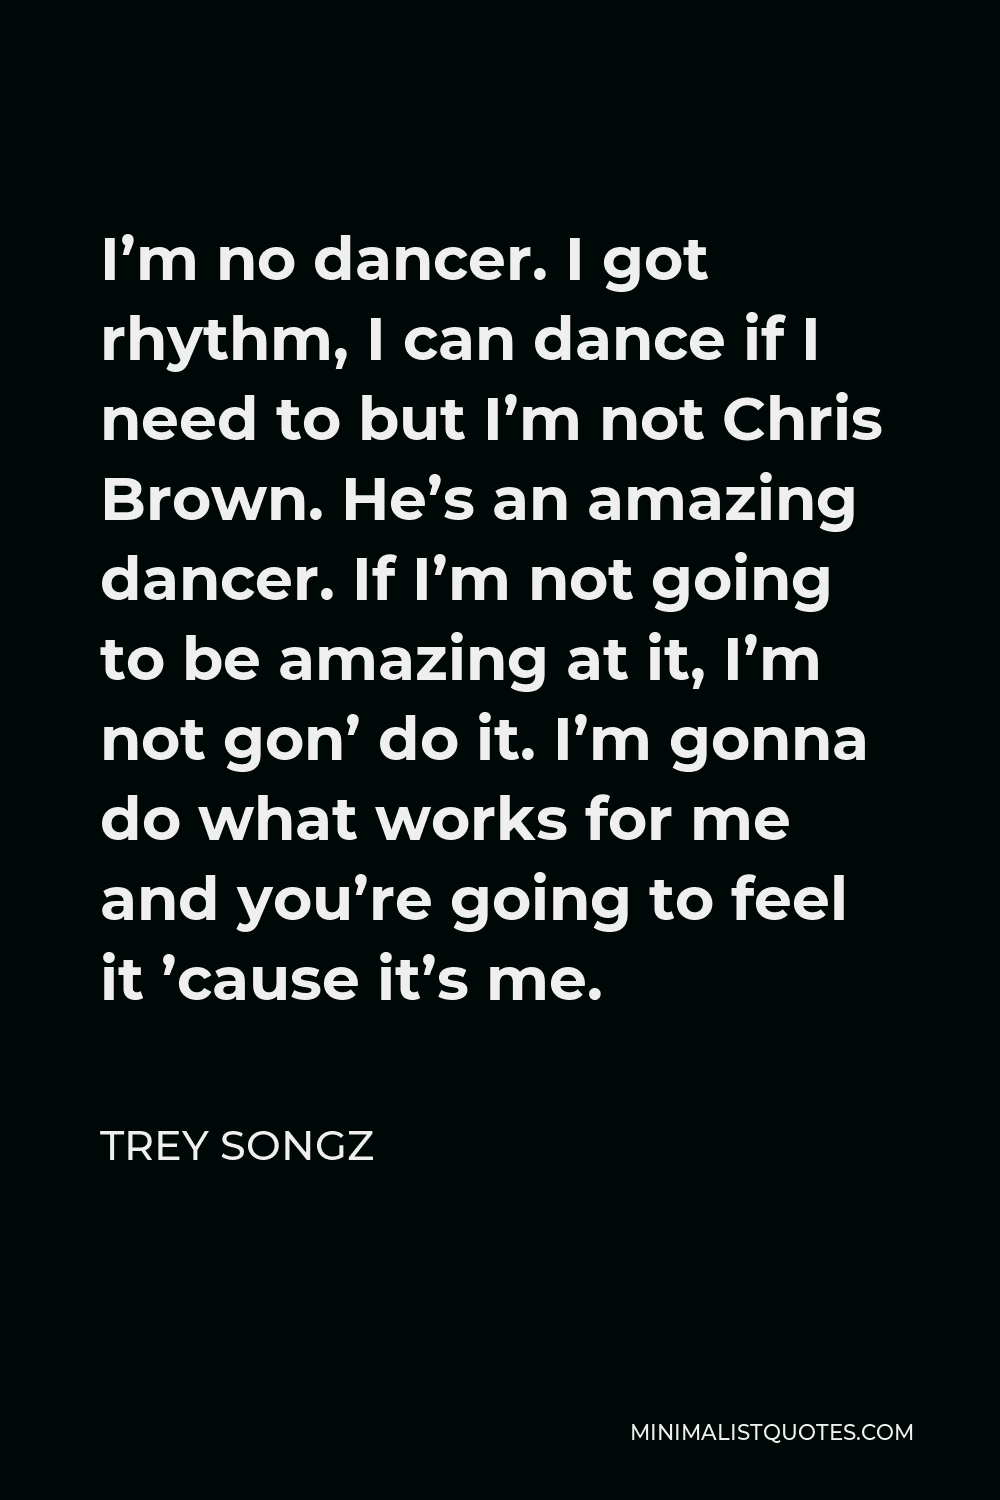 Trey Songz Quote - I’m no dancer. I got rhythm, I can dance if I need to but I’m not Chris Brown. He’s an amazing dancer. If I’m not going to be amazing at it, I’m not gon’ do it. I’m gonna do what works for me and you’re going to feel it ’cause it’s me.